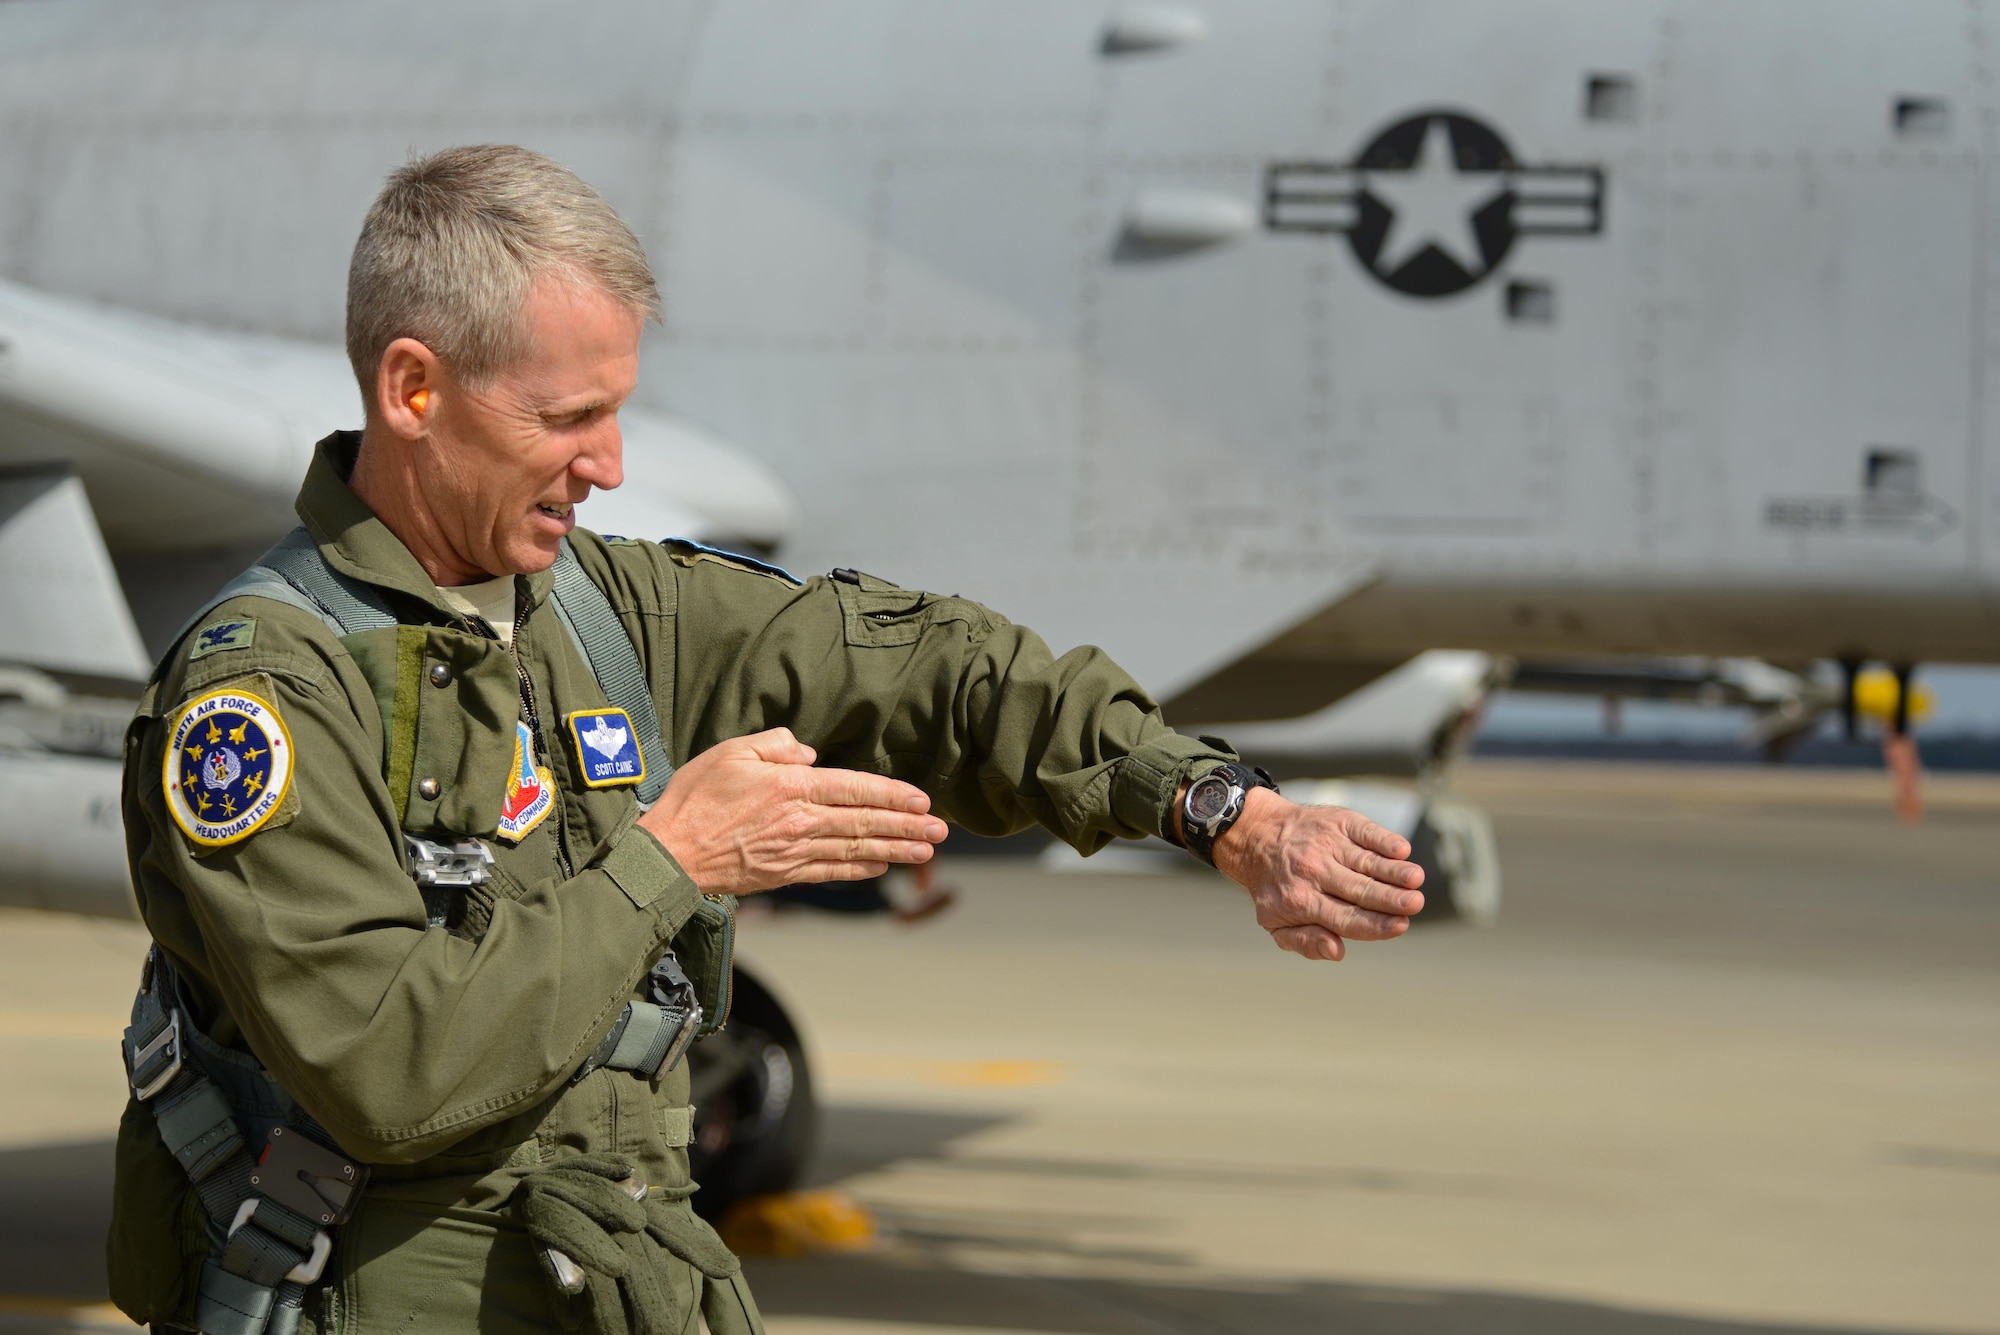 U.S. Air Force Col. Scott Caine, 9th Air Force vice commander, gestures toward his watch before completing his final flight in the Air Force, Shaw Air Force Base, S.C., Feb. 8, 2017. Caine piloted an A-10C Thunderbolt II for his final flight before retiring after 30 years of service. (U.S. Air Force photo by Airman 1st Class Kathryn R.C. Reaves)